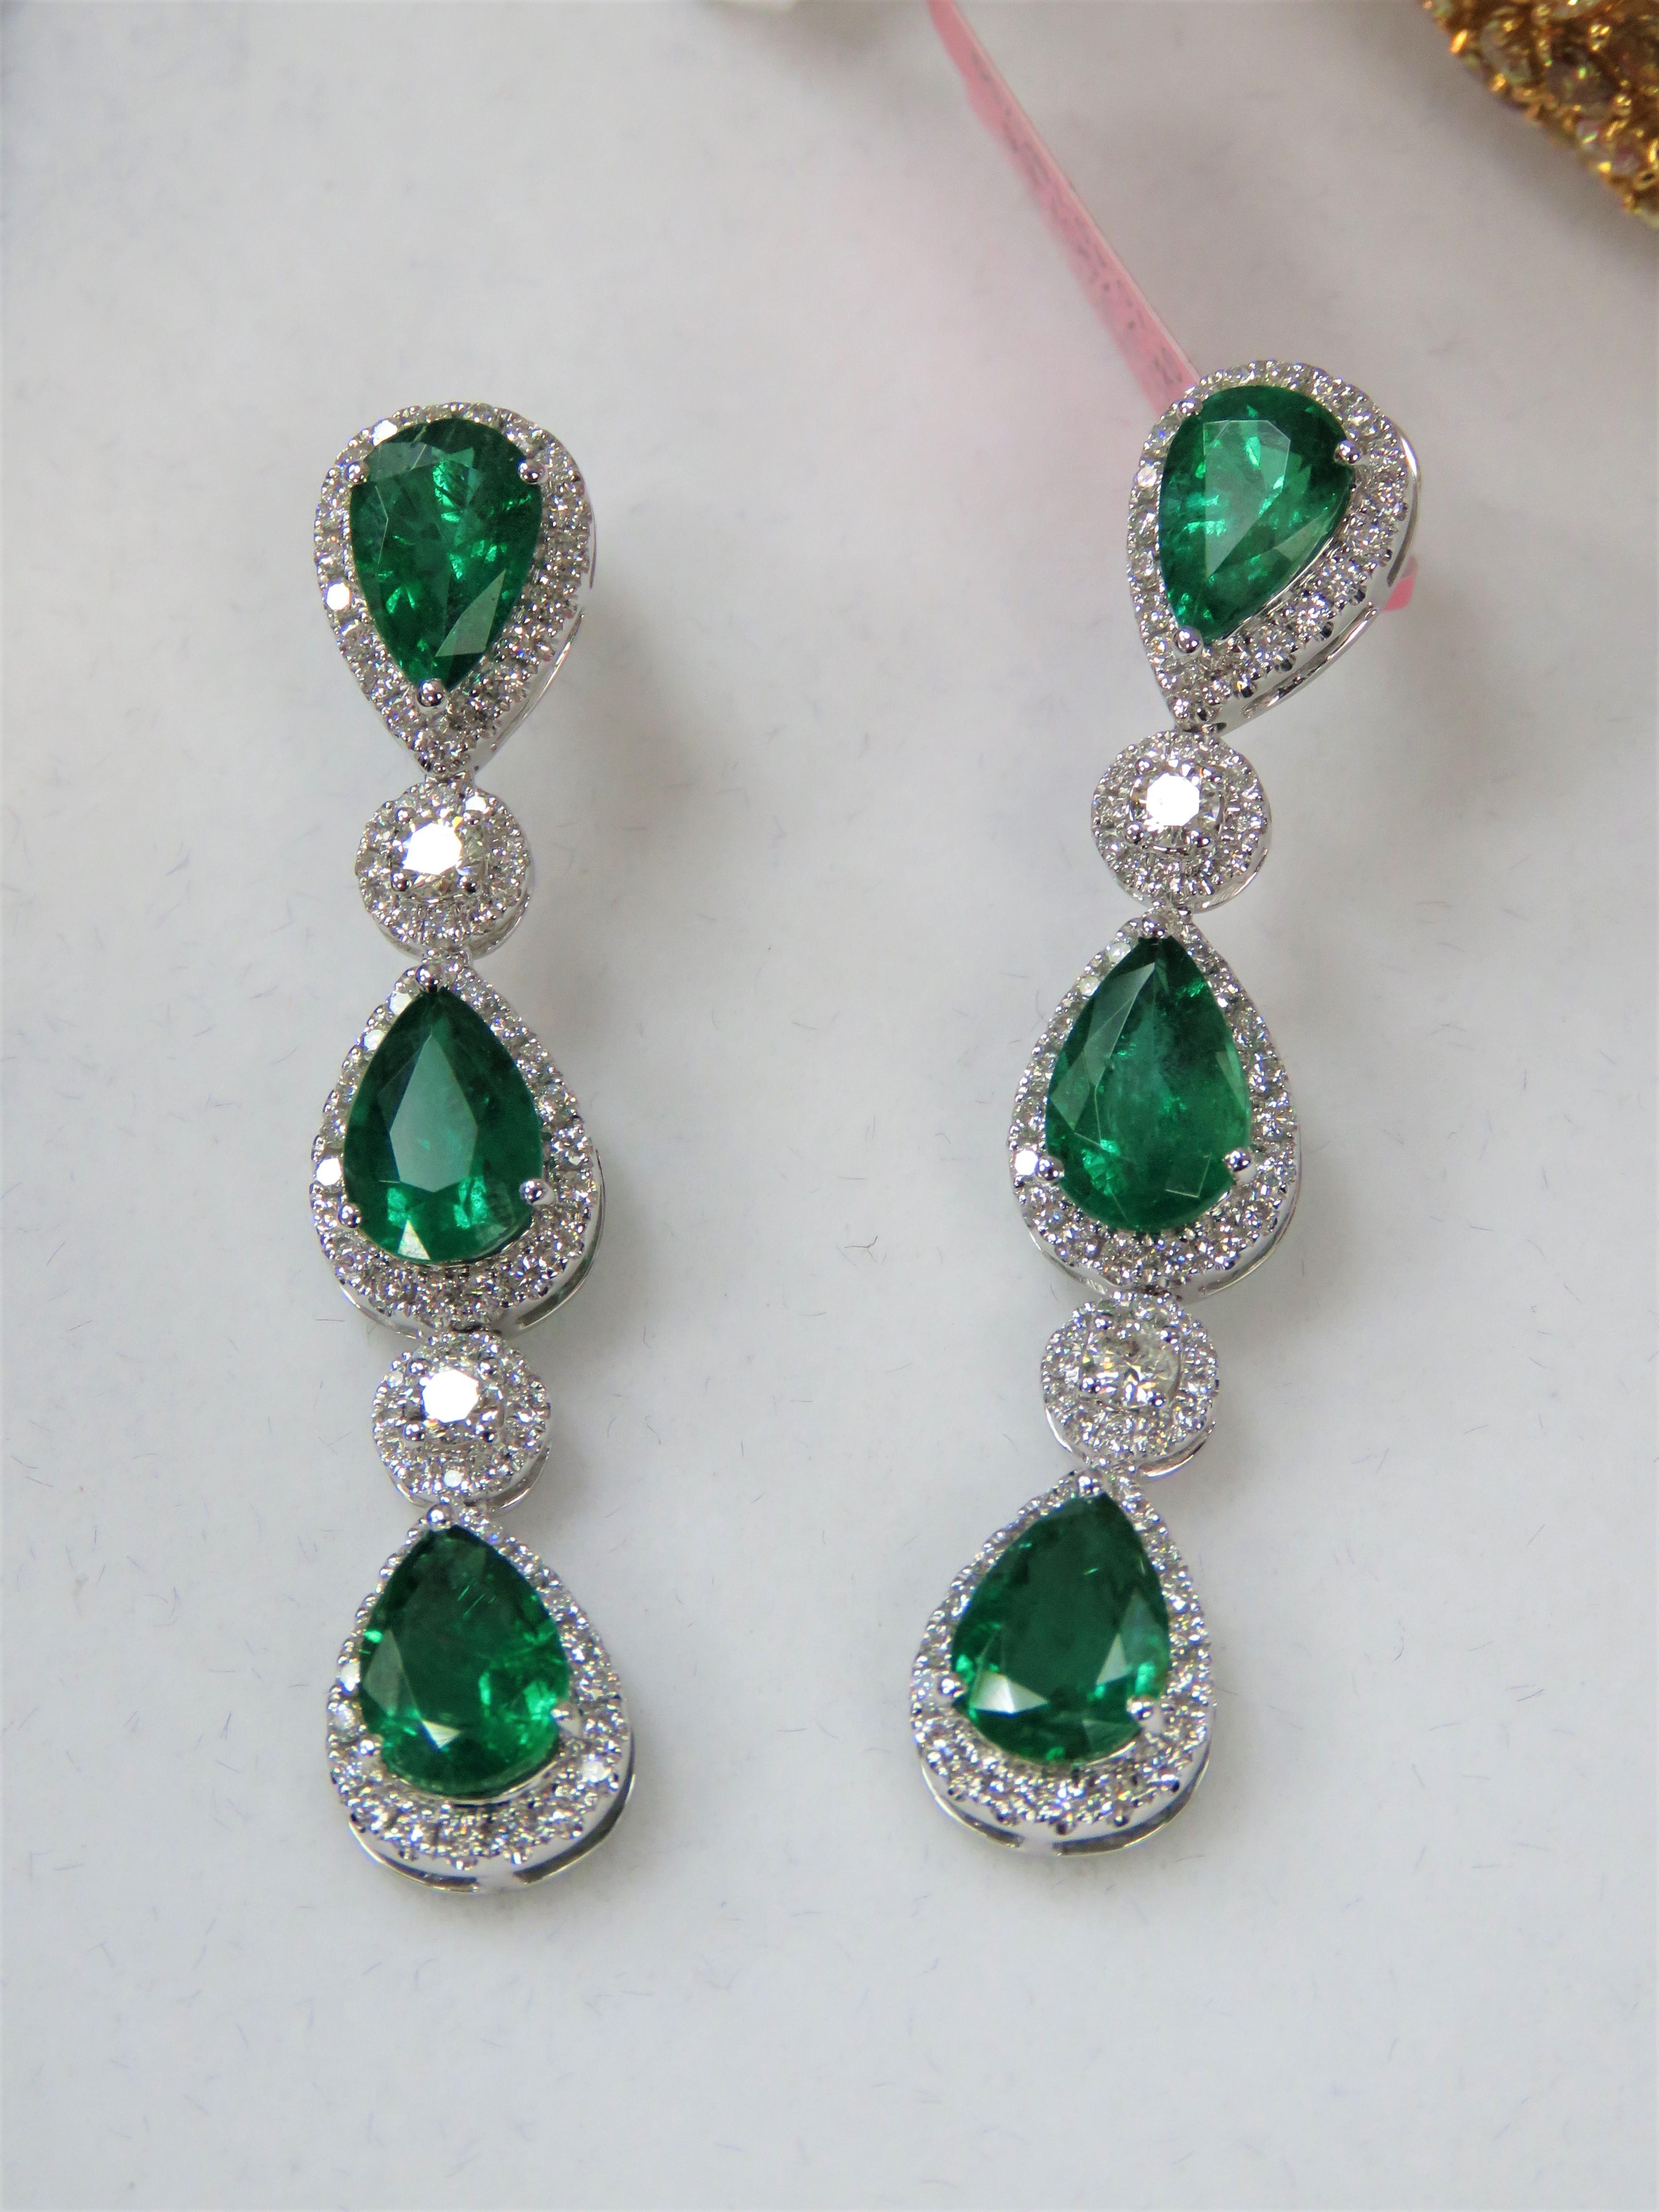 The Following Items we are offering is a Pair of Rare 18KT Gold Large Emerald Diamond Dangle. Earrings are comprised of Finely Set Gorgeous Large Gorgeous Green Emerald Diamond Dangle Earrings!!! T.C.W. Approx 9.50CTS!! These Gorgeous Earrings are a